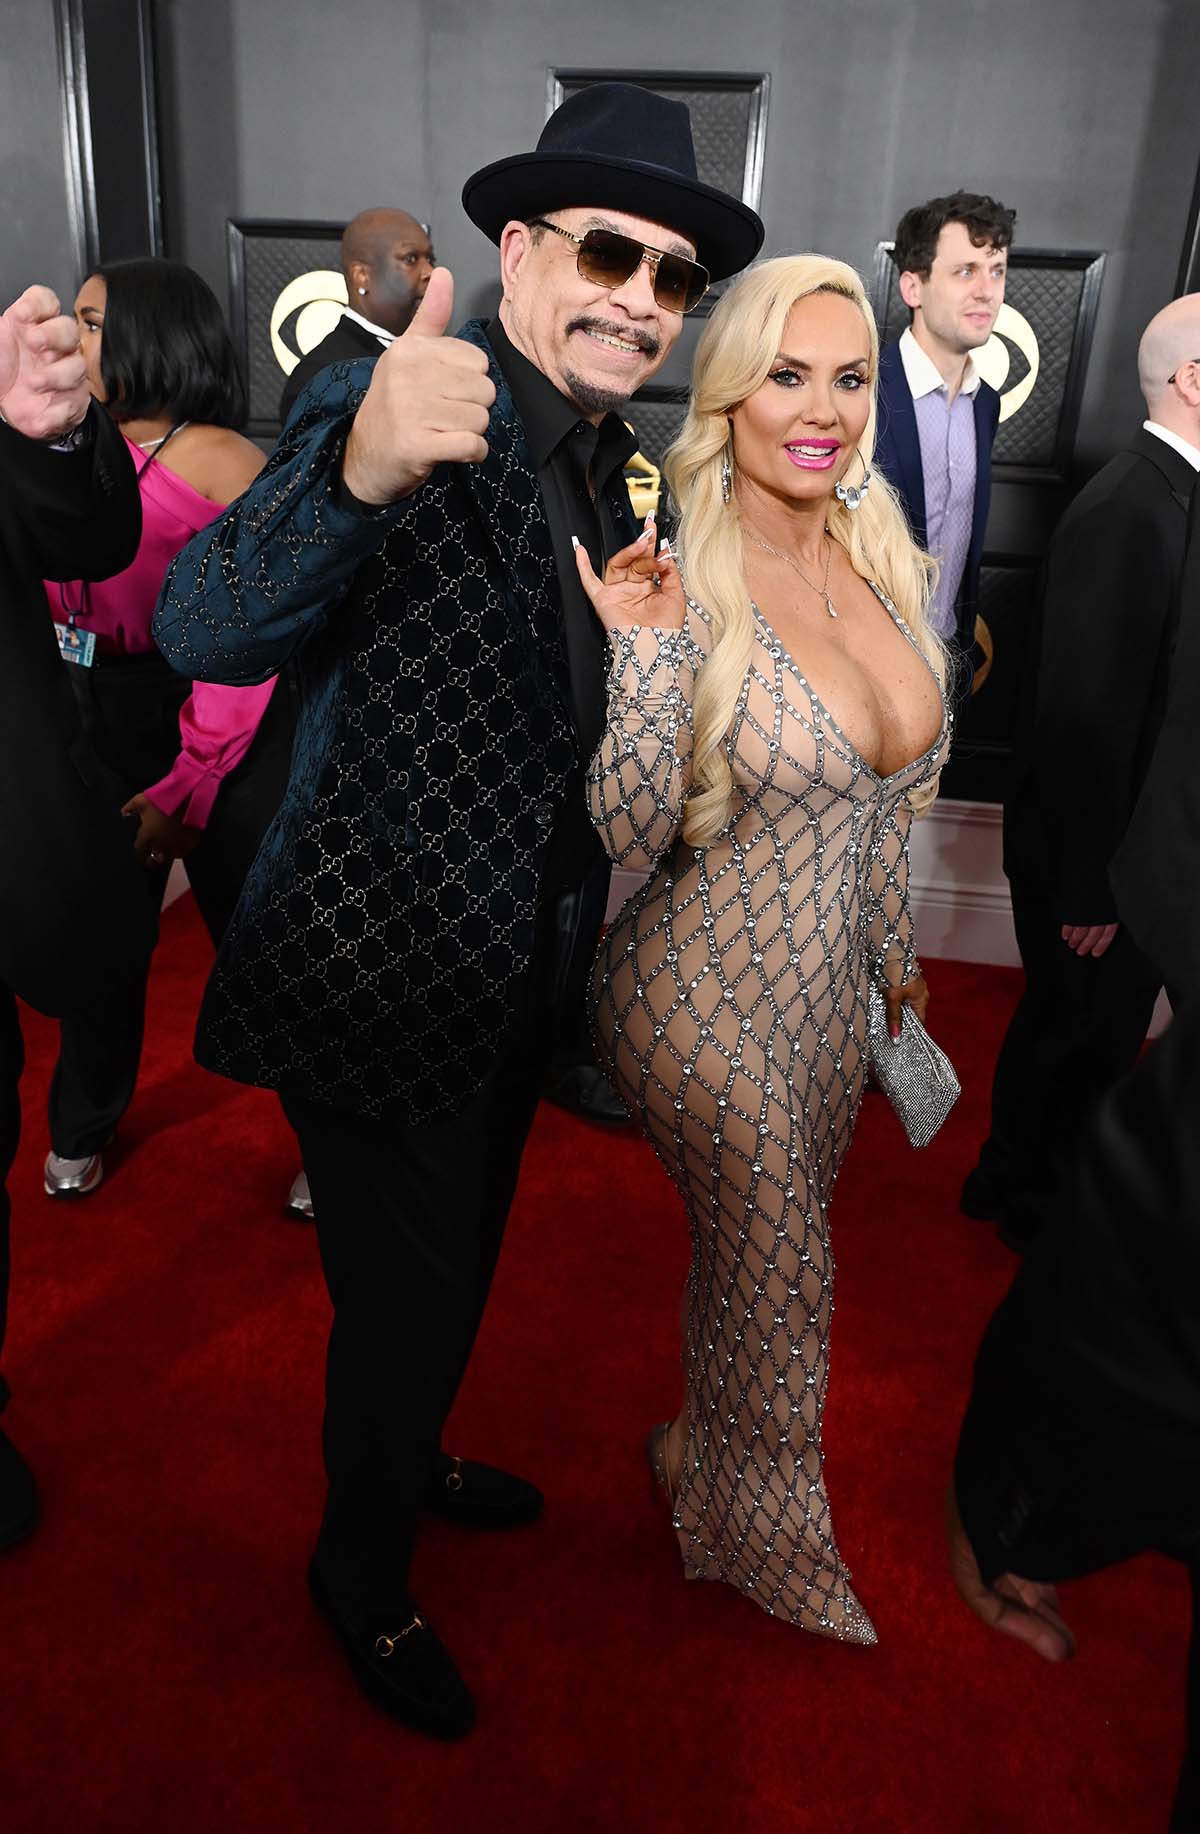 IceT Laughs Off Grammys Attendee Checking Out Coco Austin